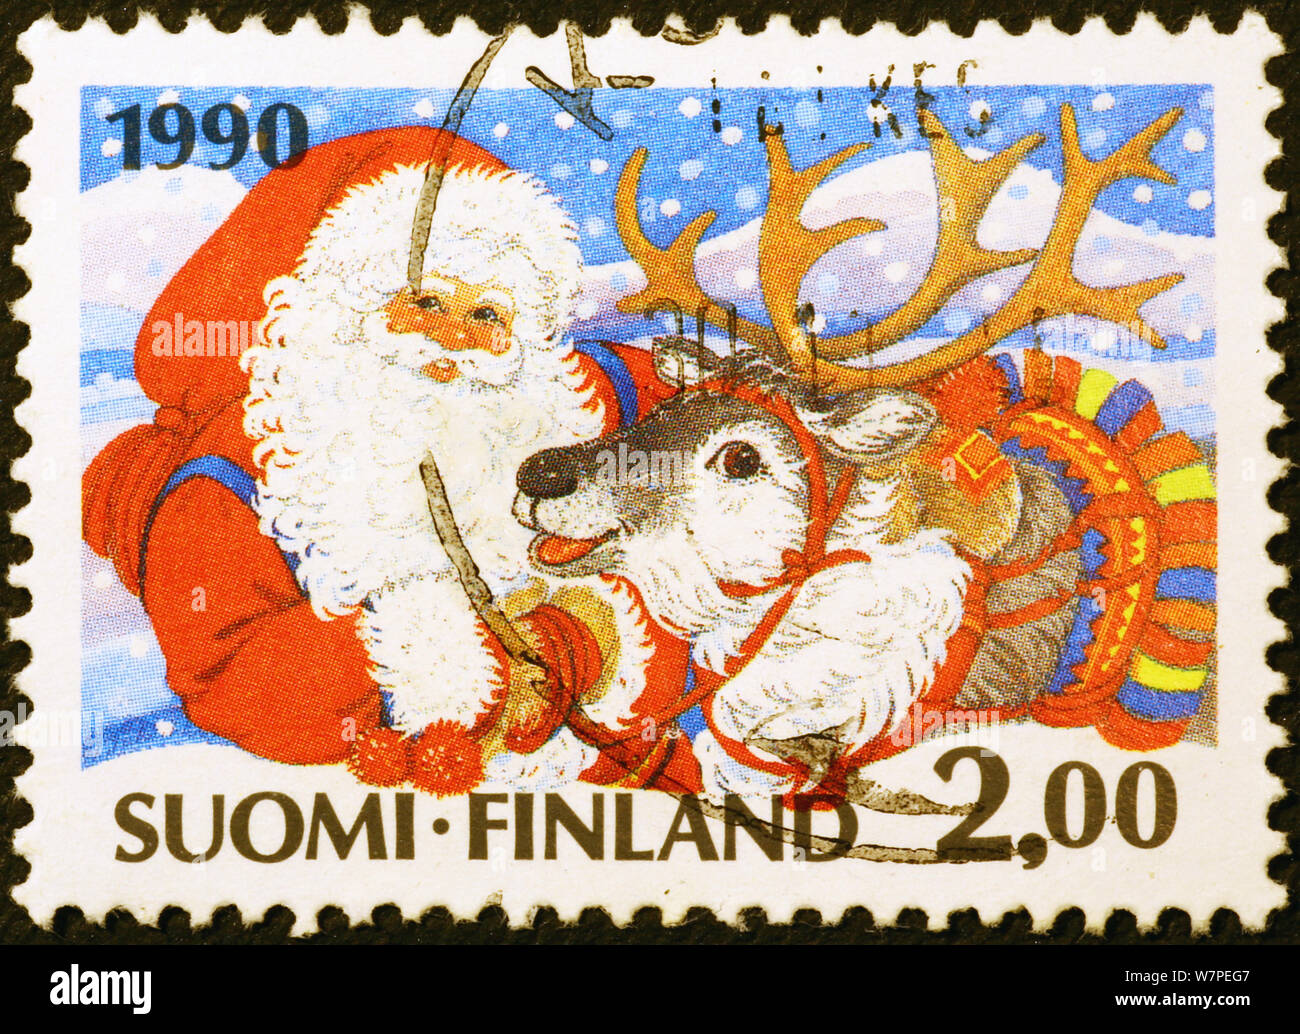 Santa Claus and reindeer on finnish postage stamp Stock Photo